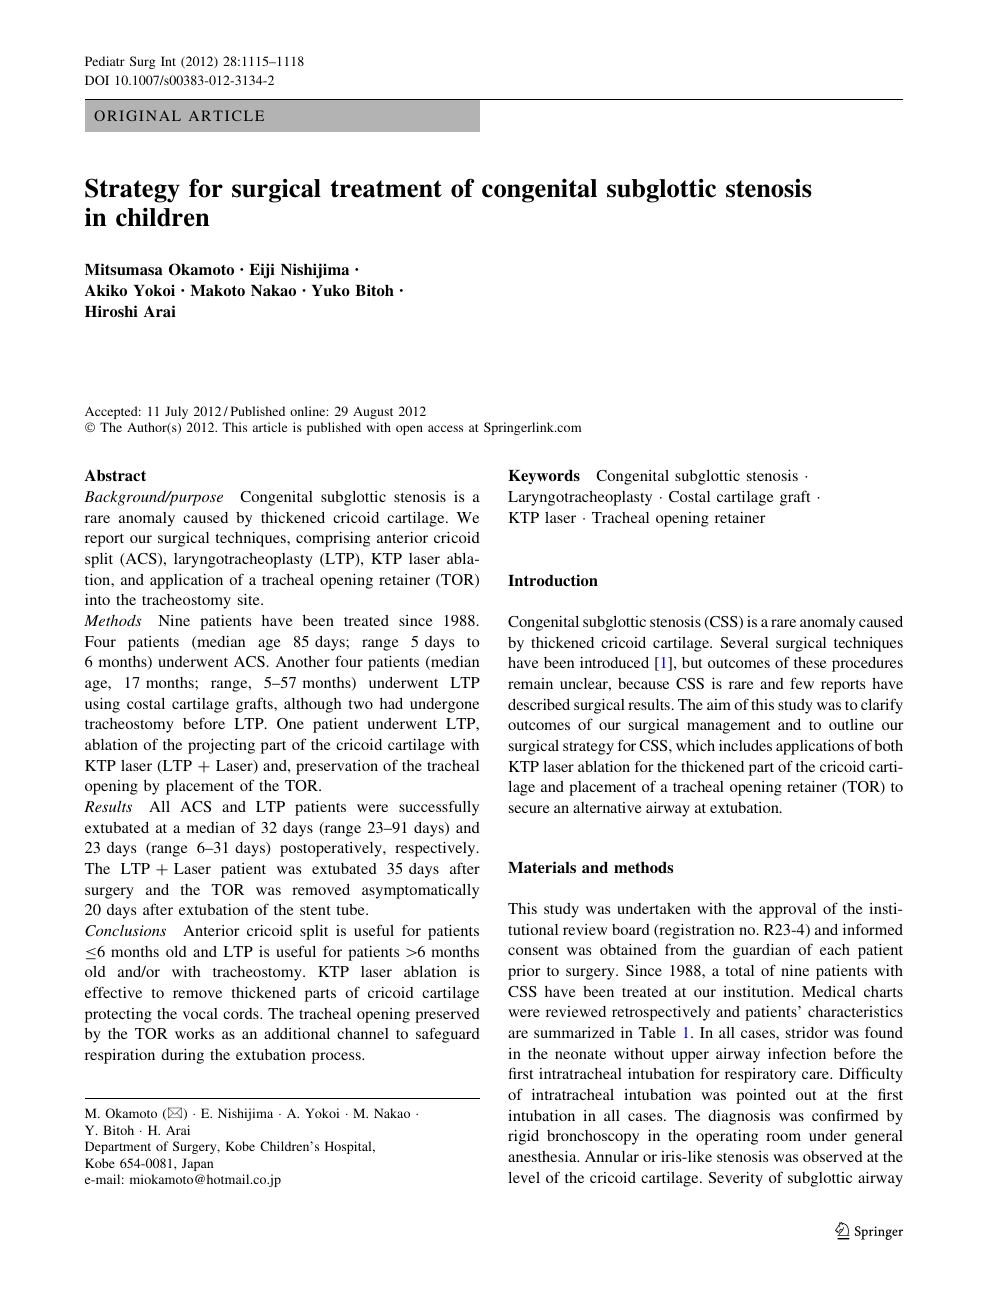 Strategy For Surgical Treatment Of Congenital Subglottic Stenosis In Children Topic Of Research Paper In Clinical Medicine Download Scholarly Article Pdf And Read For Free On Cyberleninka Open Science Hub